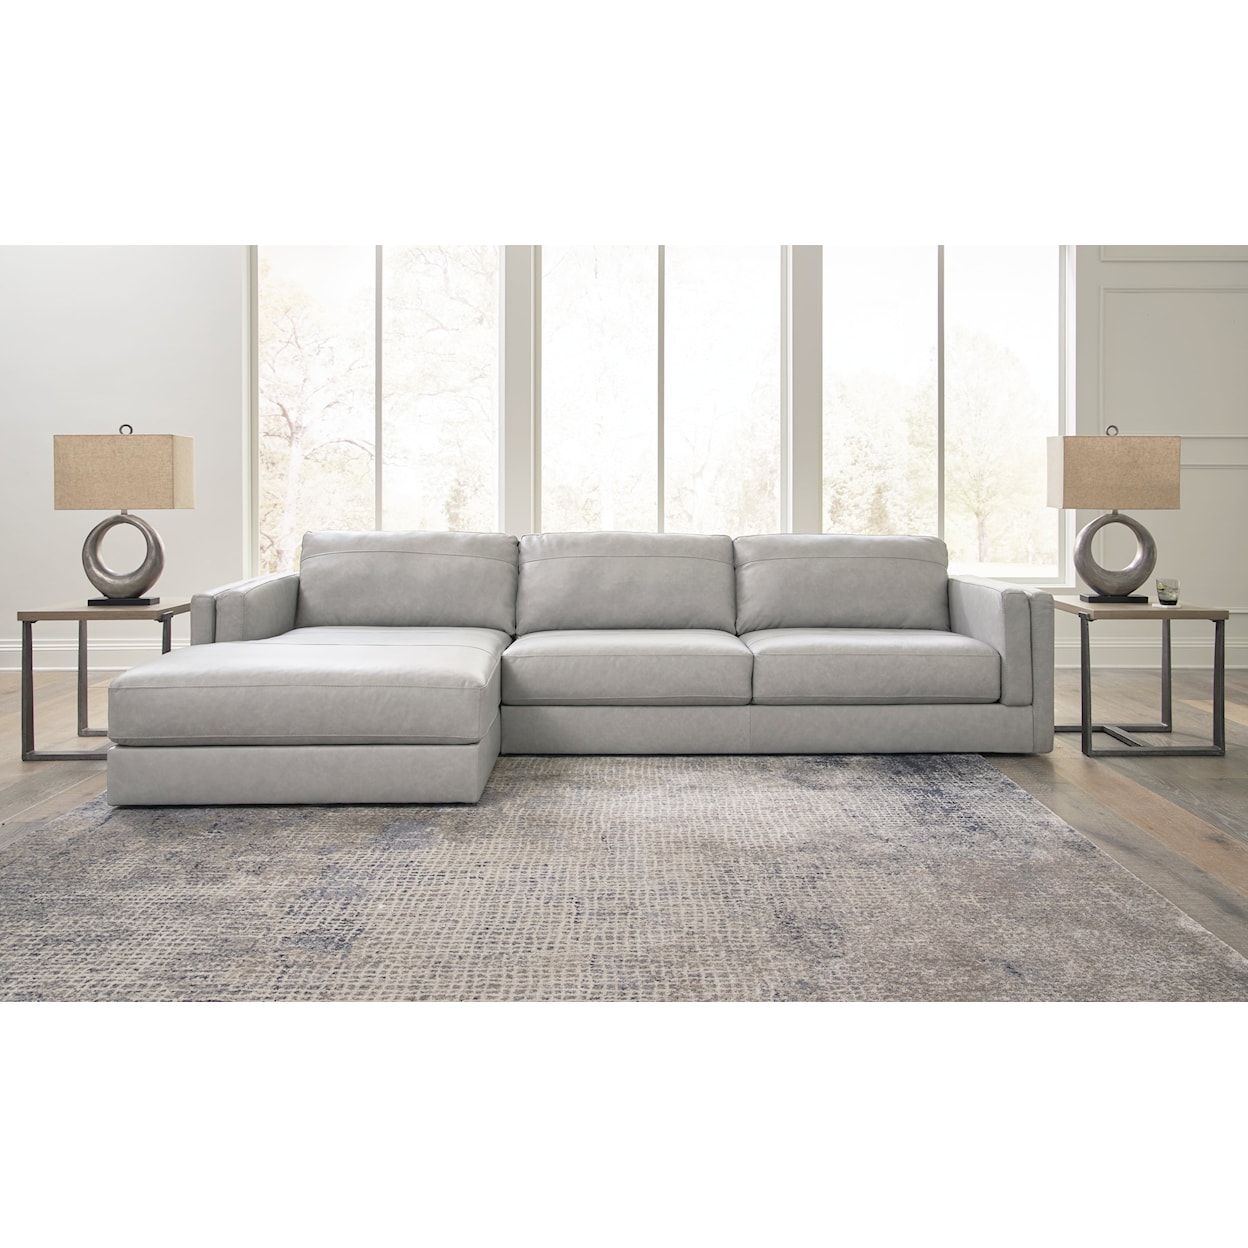 Michael Alan Select Amiata 2-Piece Sectional With Chaise